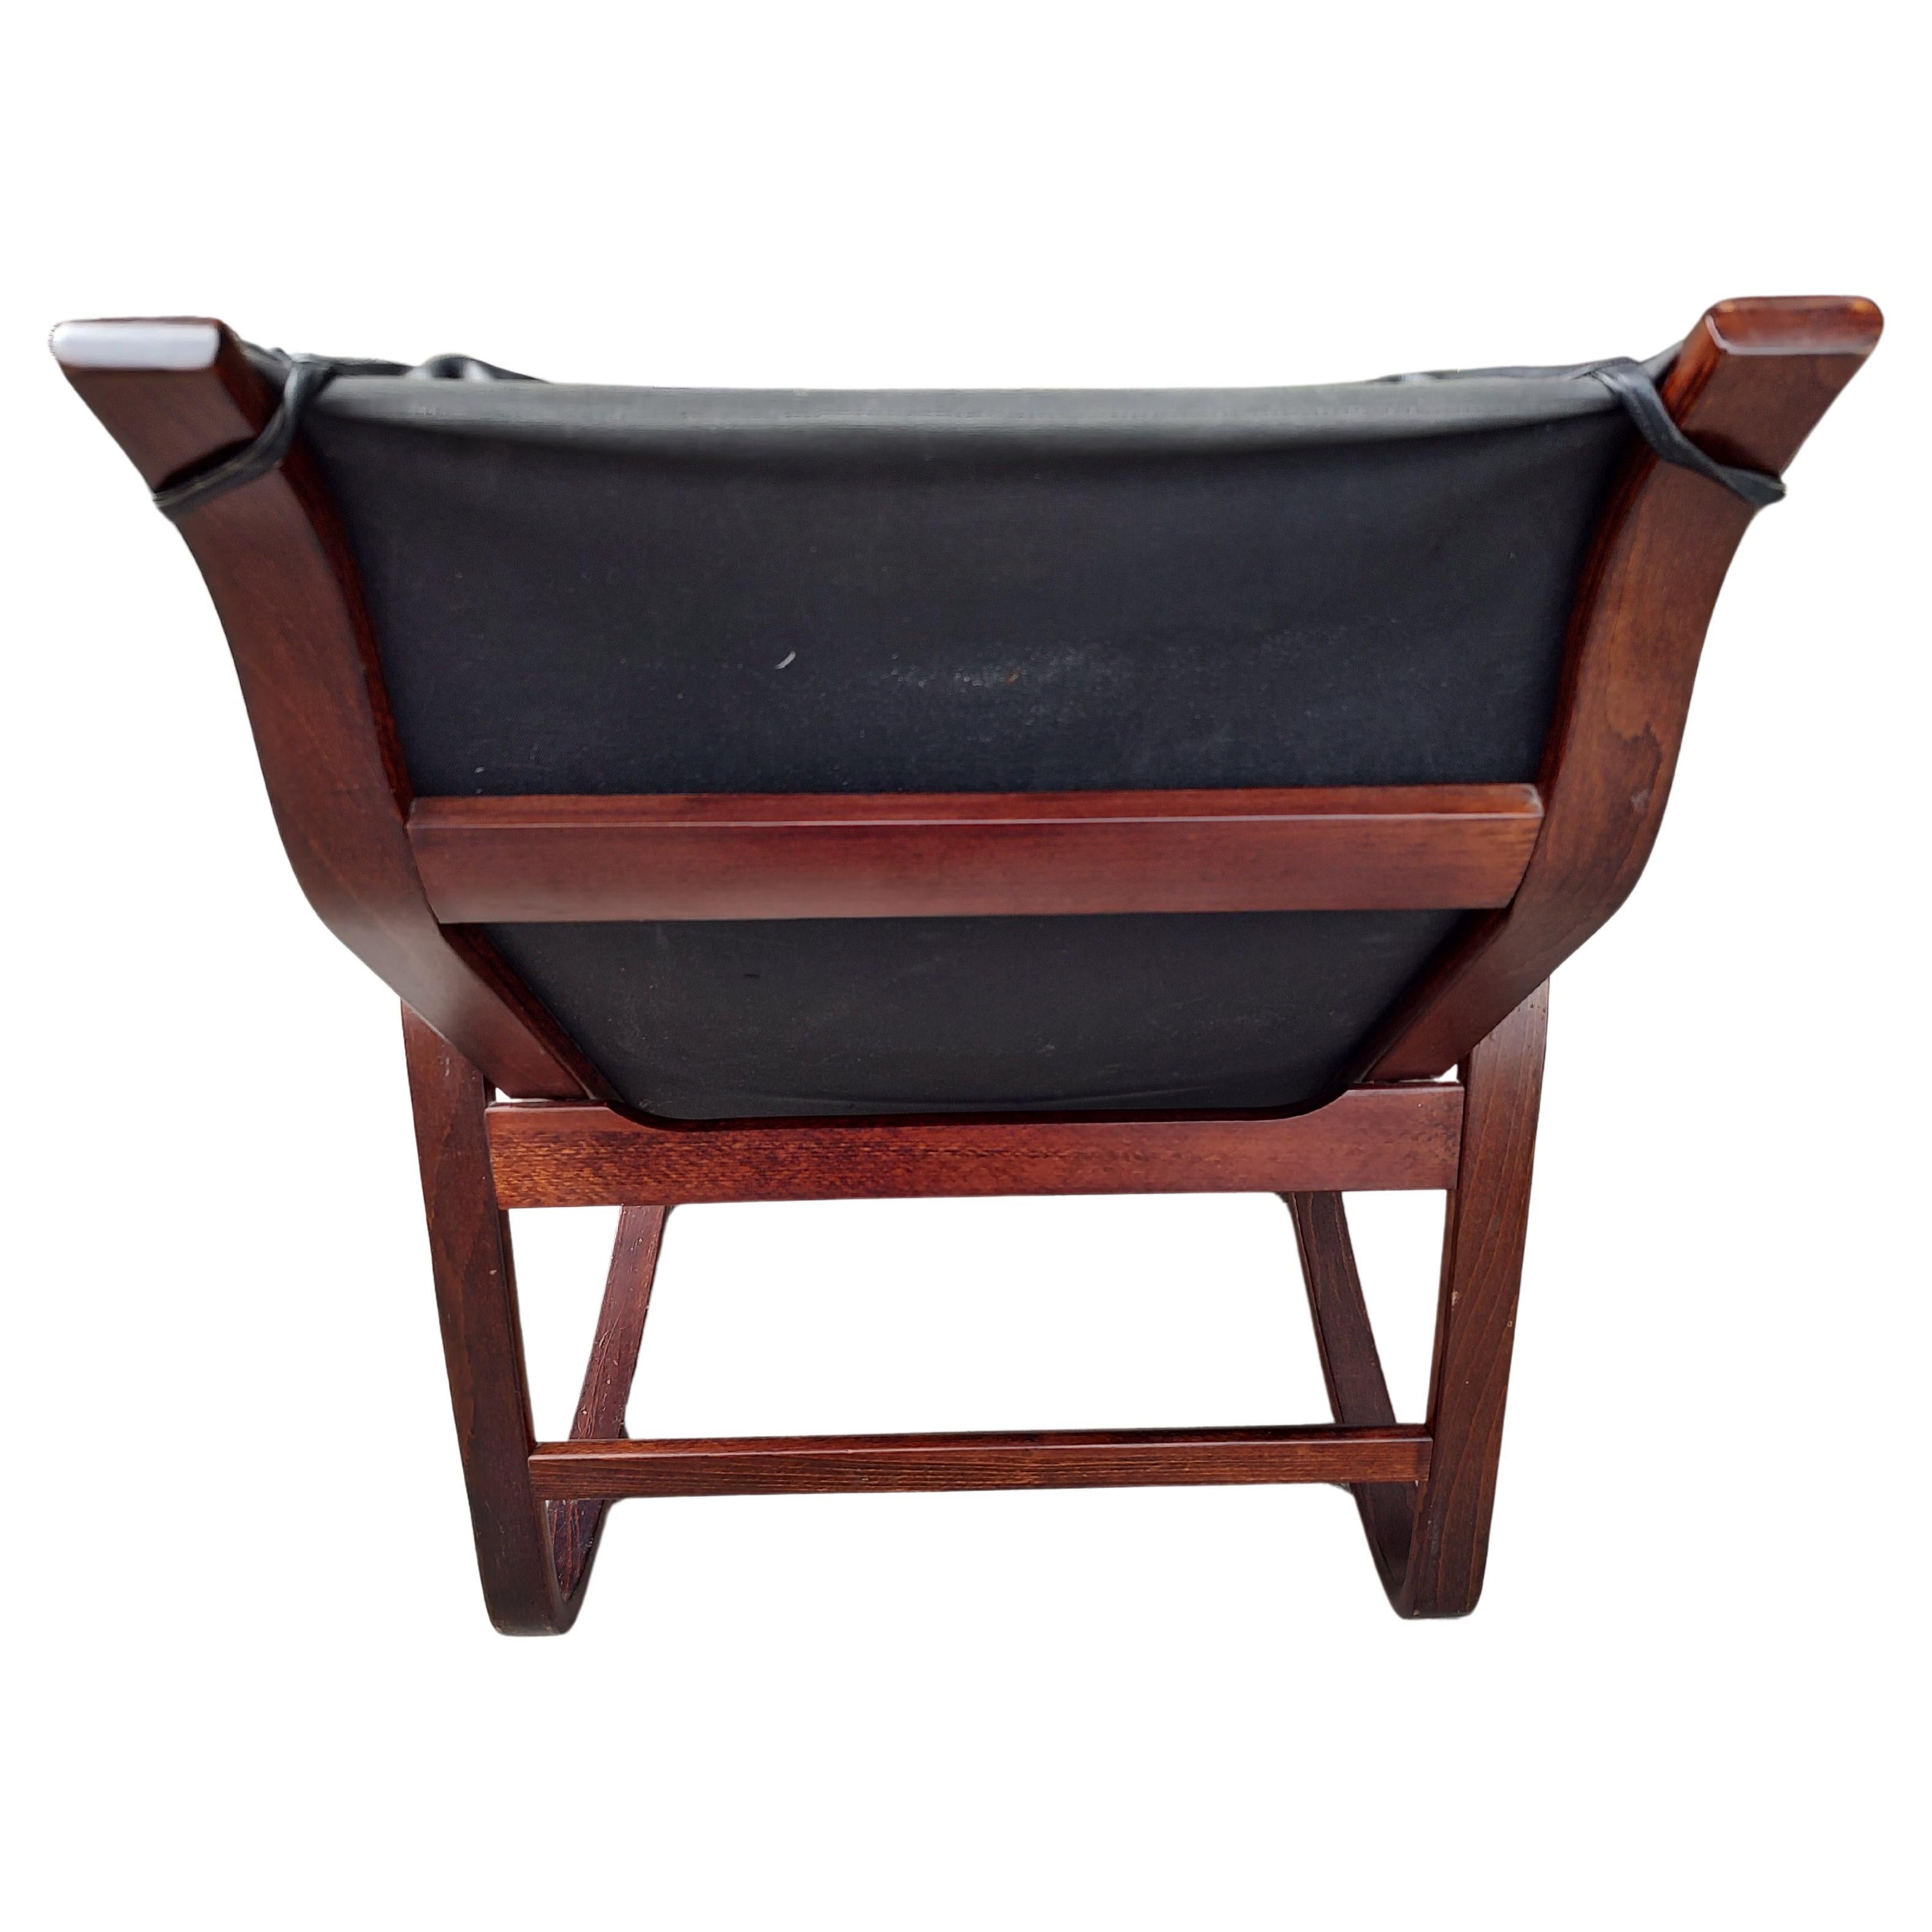 Fabulous bentwood rocker in rosewood and black leather by Ingmar Relling for Westnofa. Very comfy and in excellent vintage condition with minimal wear.